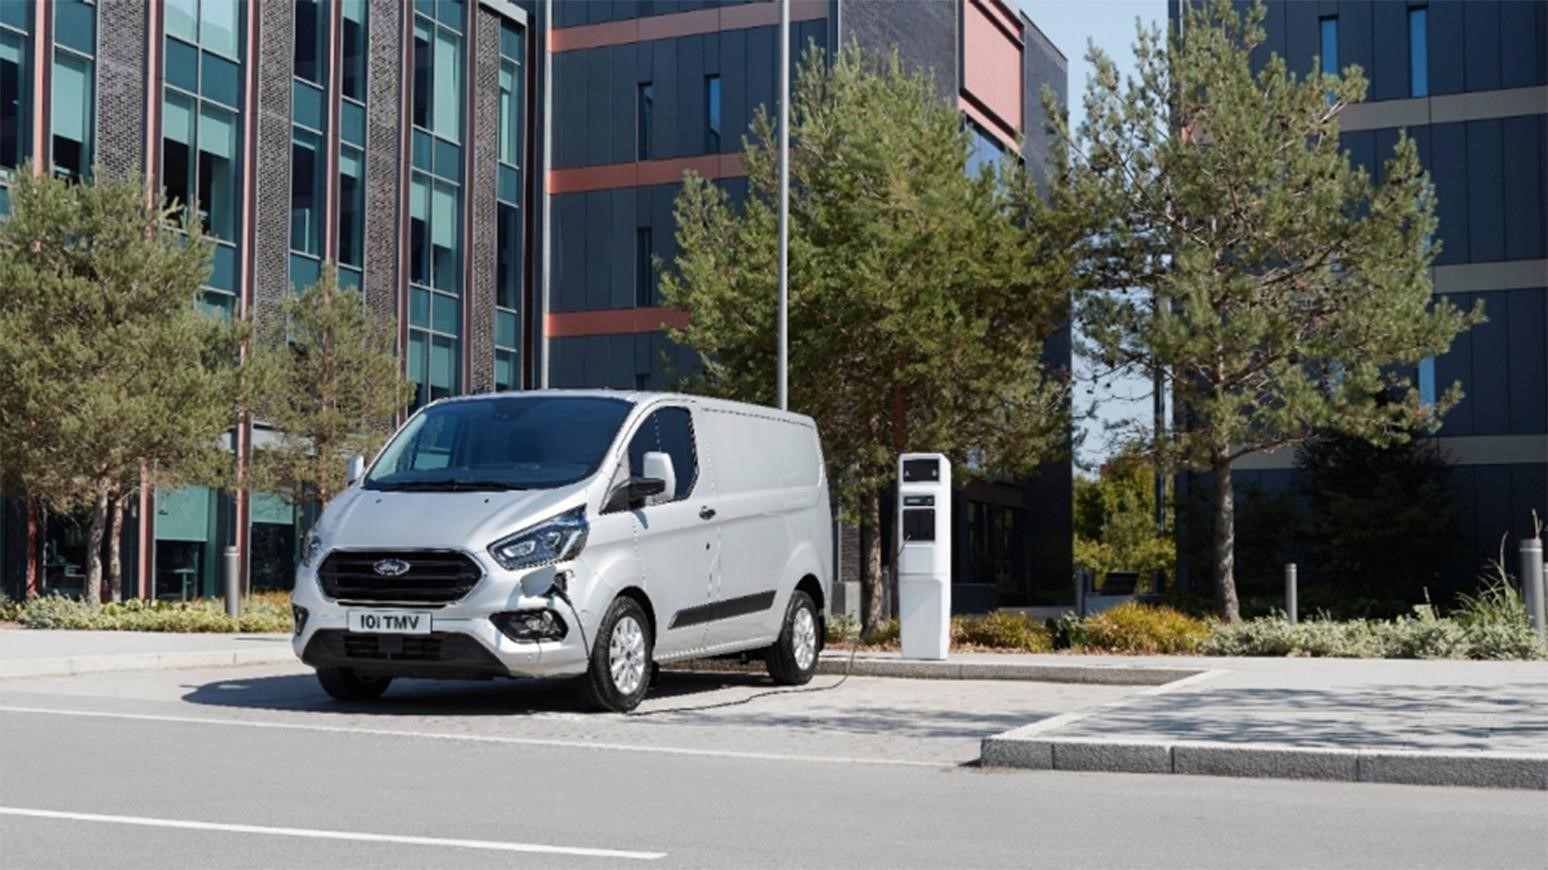 Ford Demonstrates Viability Of Electric Commercial Vehicles With Ford Transit Custom Plug-In Hybrid Vans